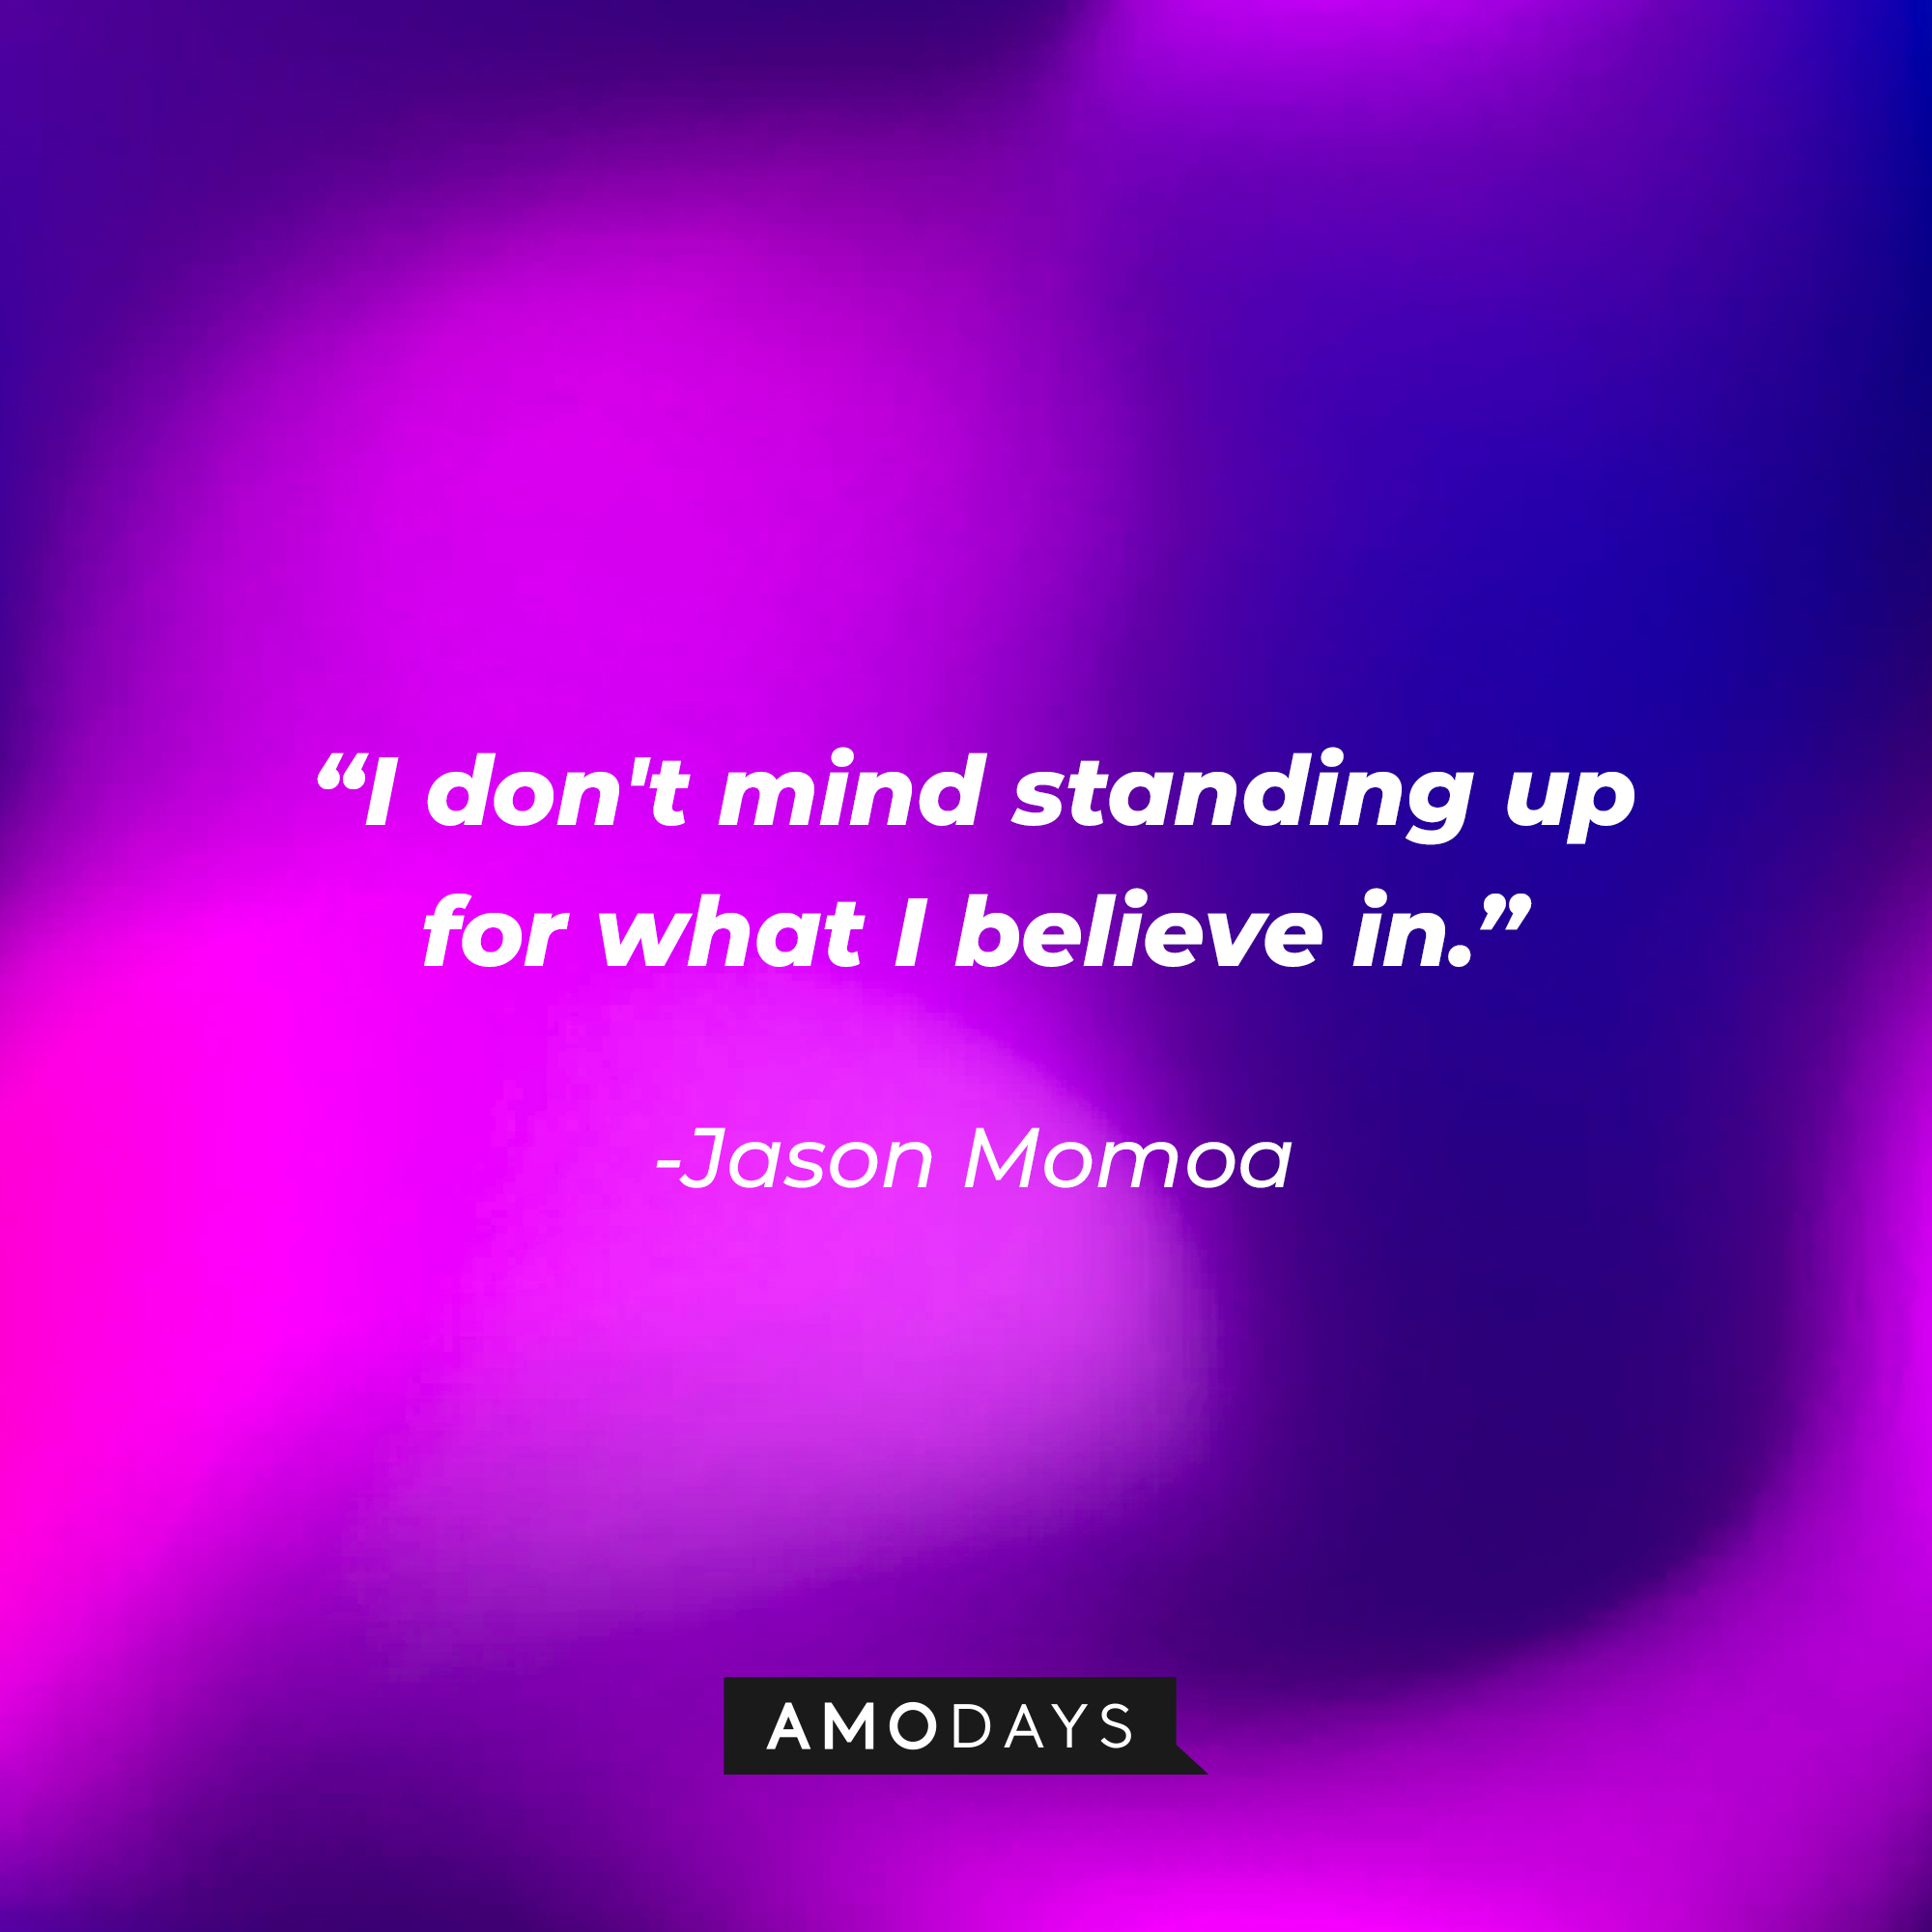 Jason Momoa's quote: “I don't mind standing up for what I believe in.” | Source: Amodays